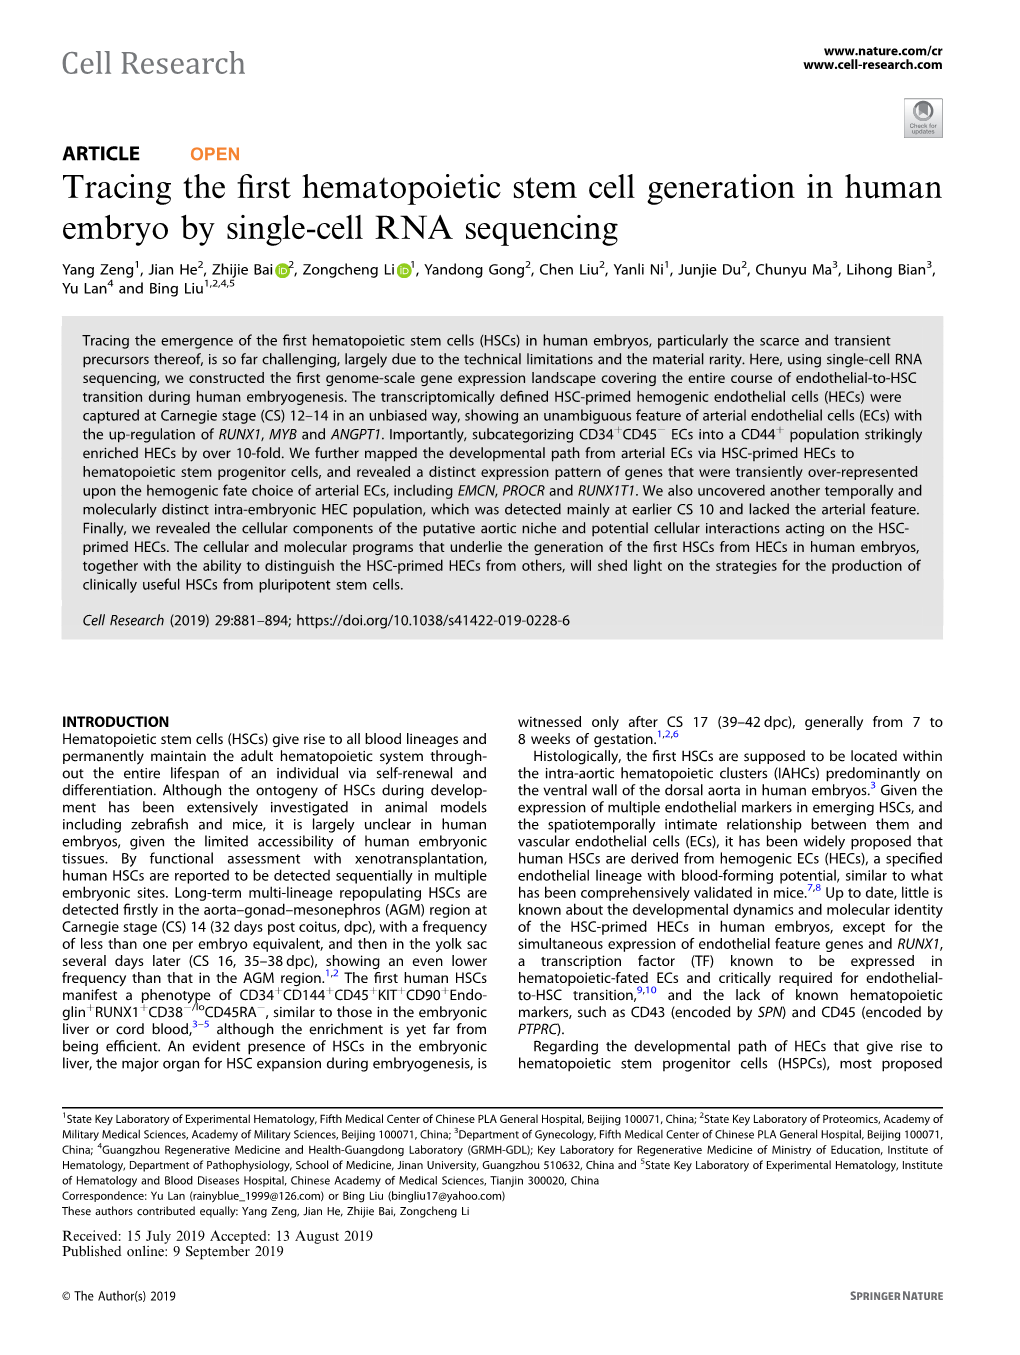 Tracing the First Hematopoietic Stem Cell Generation in Human Embryo By